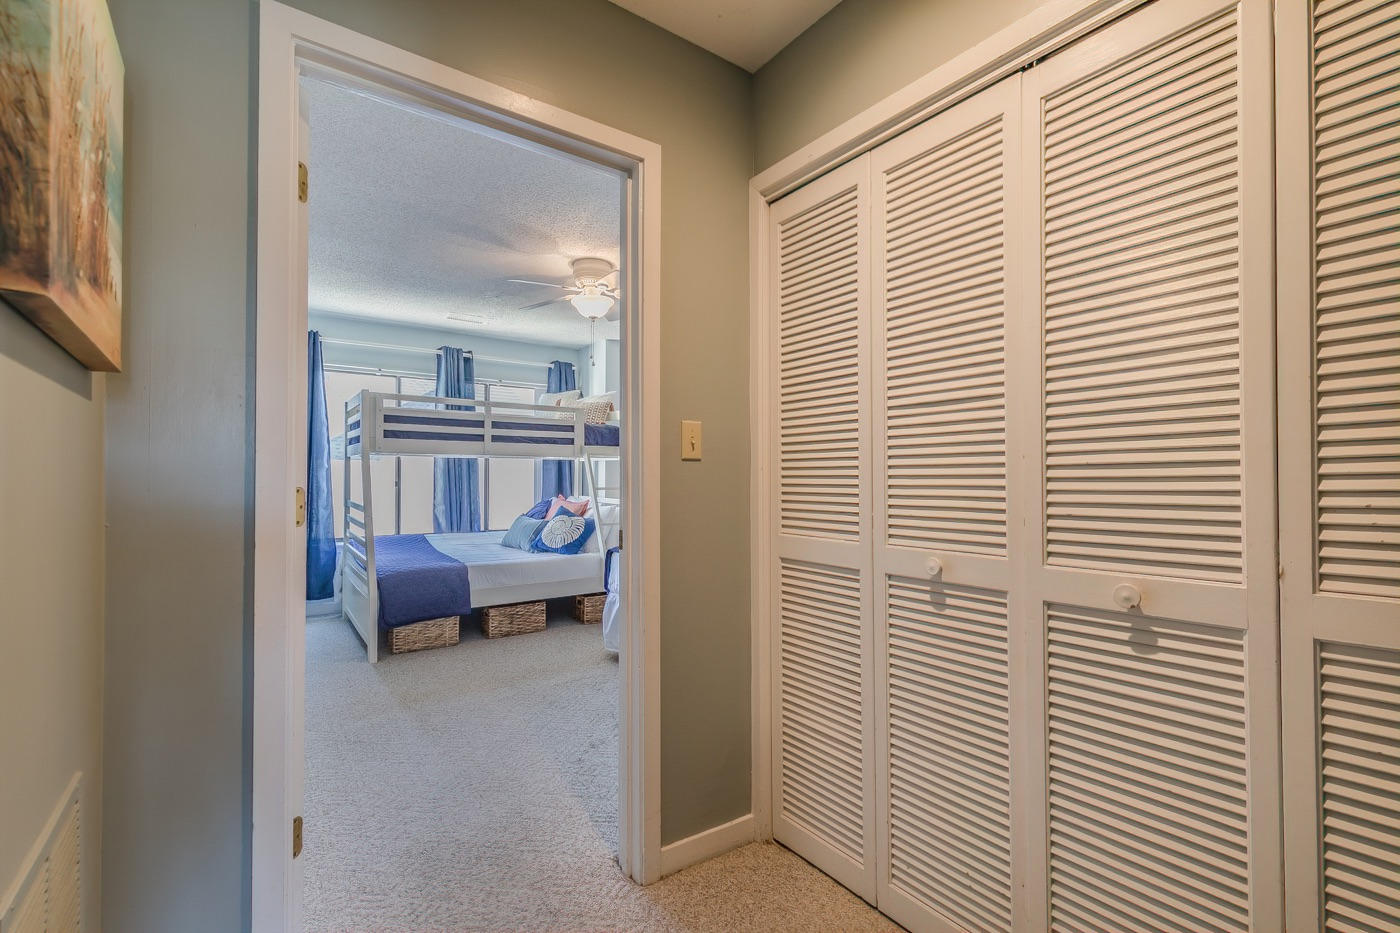 Full-size Washer and Dryer conveniently located on 2nd Floor for easy access from bedrooms